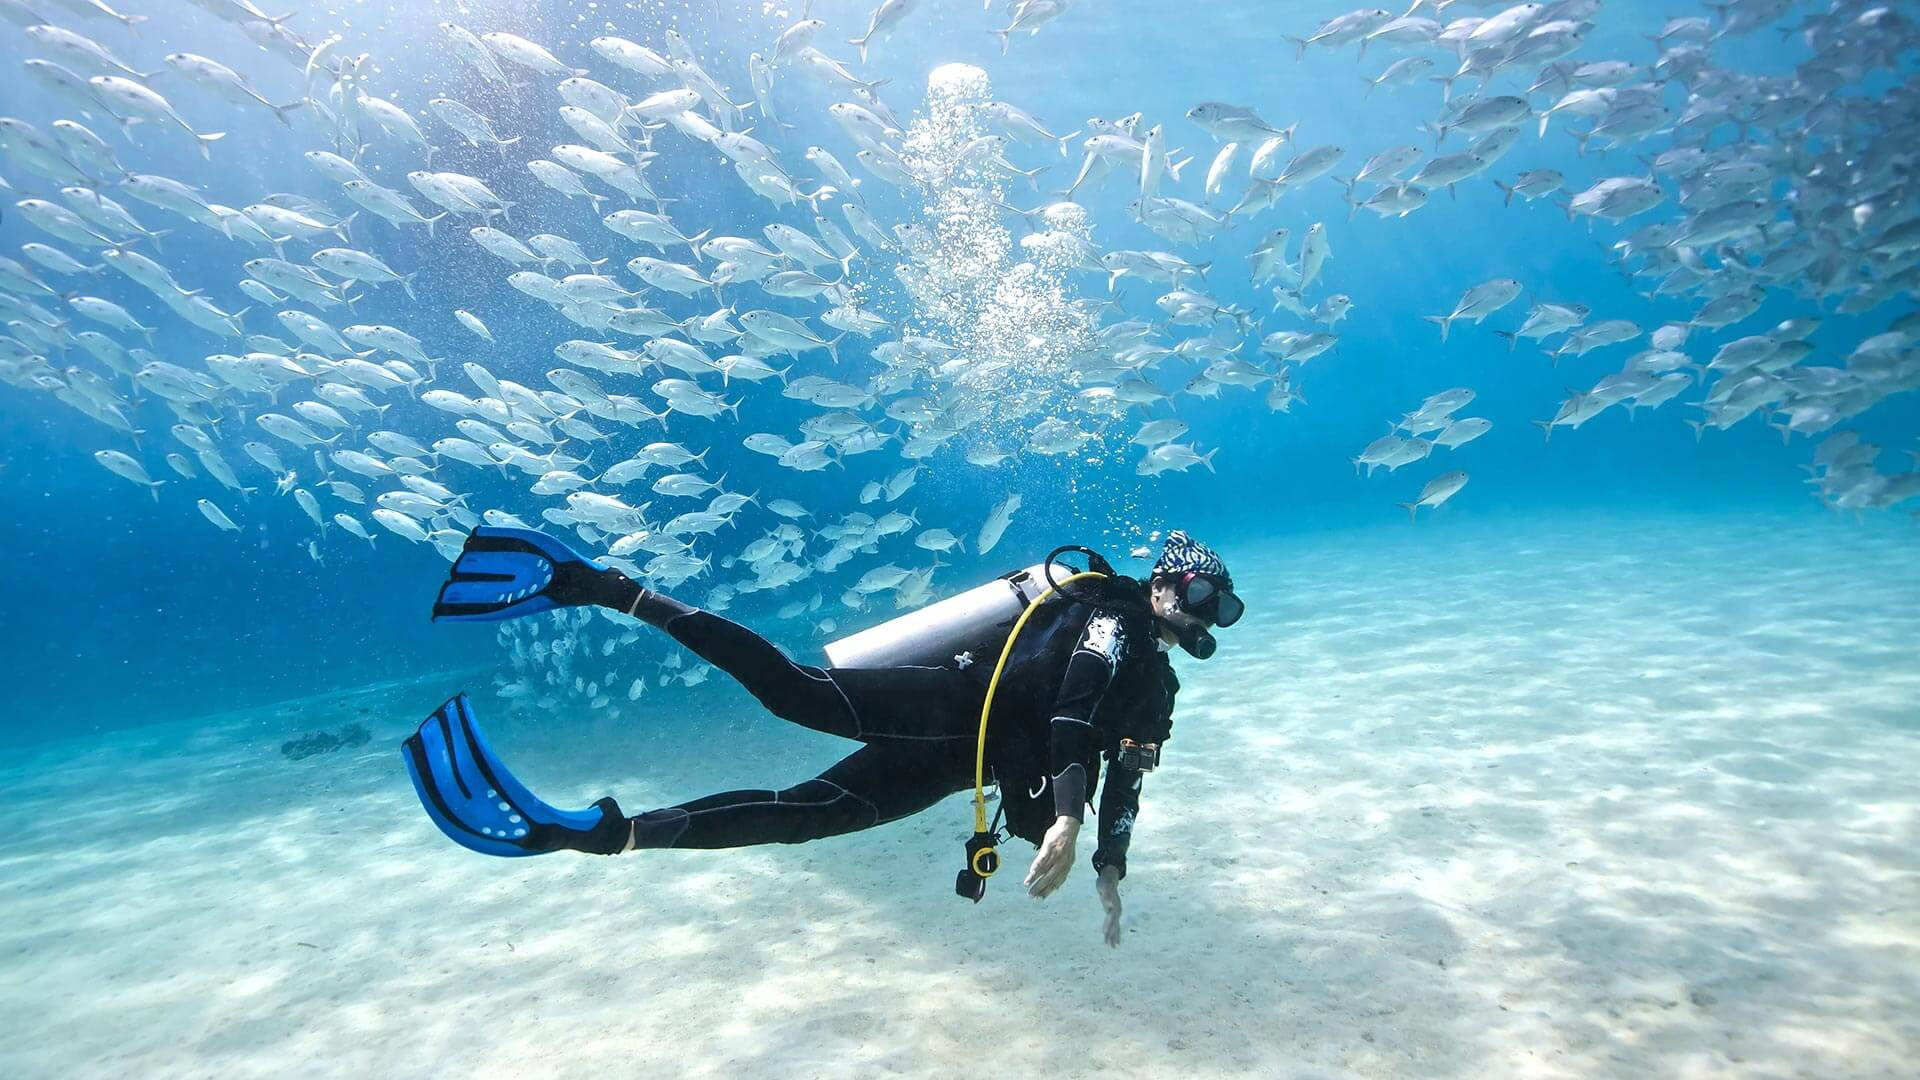 Scuba Diving With School Of Fish